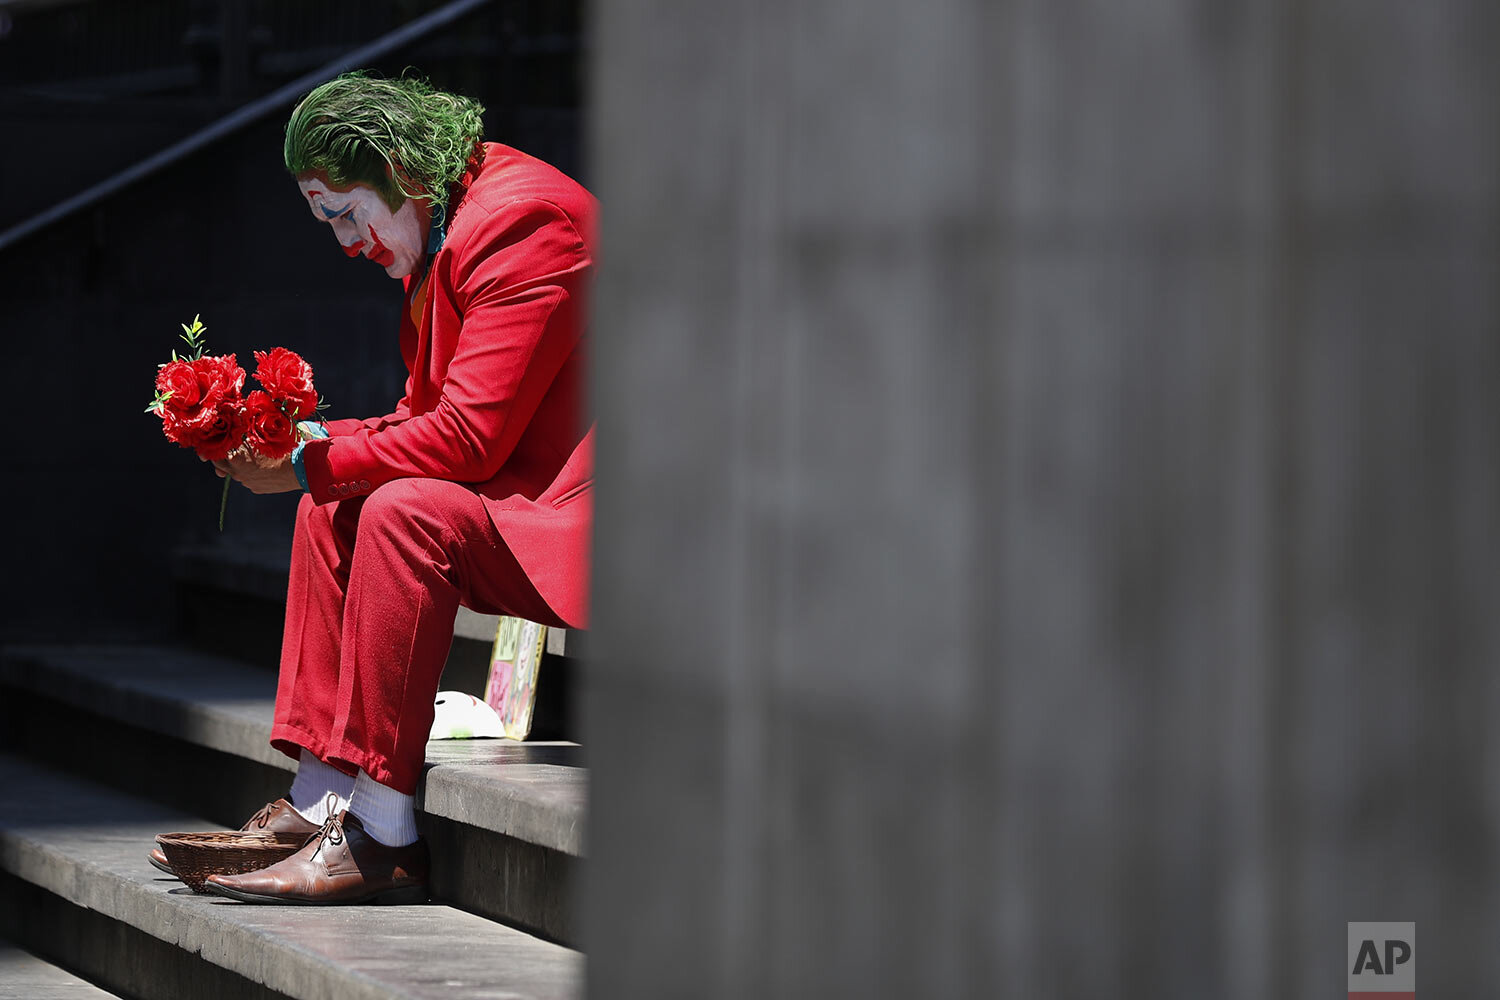  David Vazquez, a street performer dressed as the Joker, waits in hopes of pedestrians who will pay to take pictures with him in Mexico City, March 23, 2020. Vazquez, who also worked as a trainer in a gym until it shut down today, said business for s